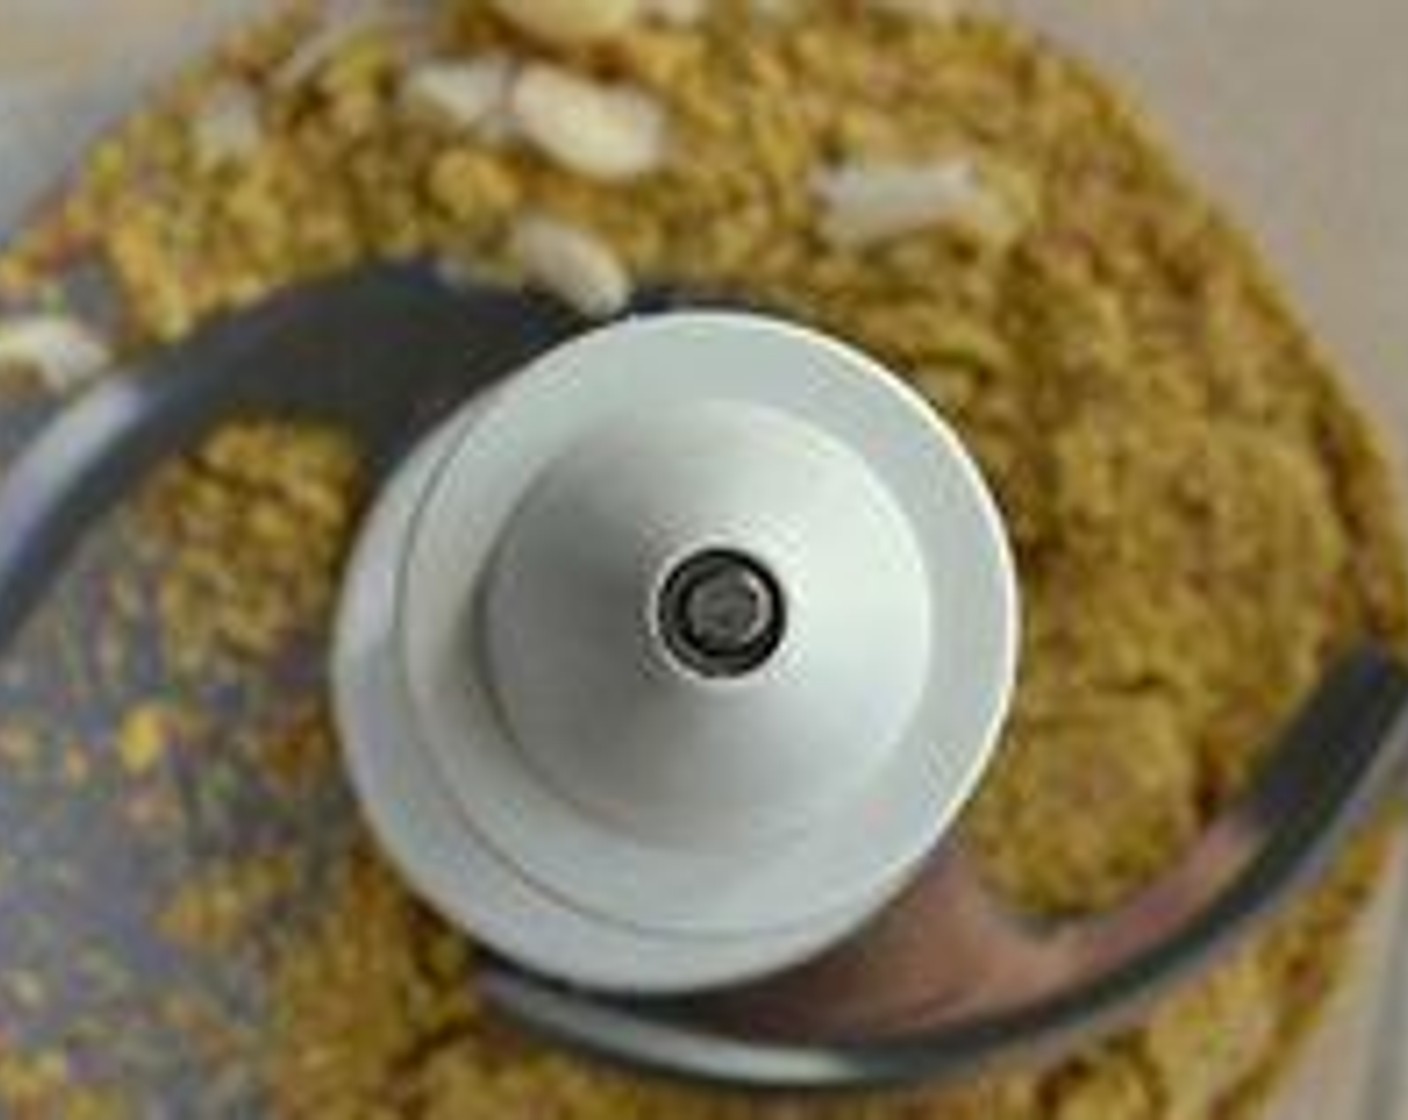 step 2 Give Almonds (1/2 cup) a quick blitz in your food processor. Now add the Garlic (2 cloves), Salt (to taste), Ground Black Pepper (to taste), Granulated Sugar (1 tsp), and Lime (1). Pulse just enough to mix them.